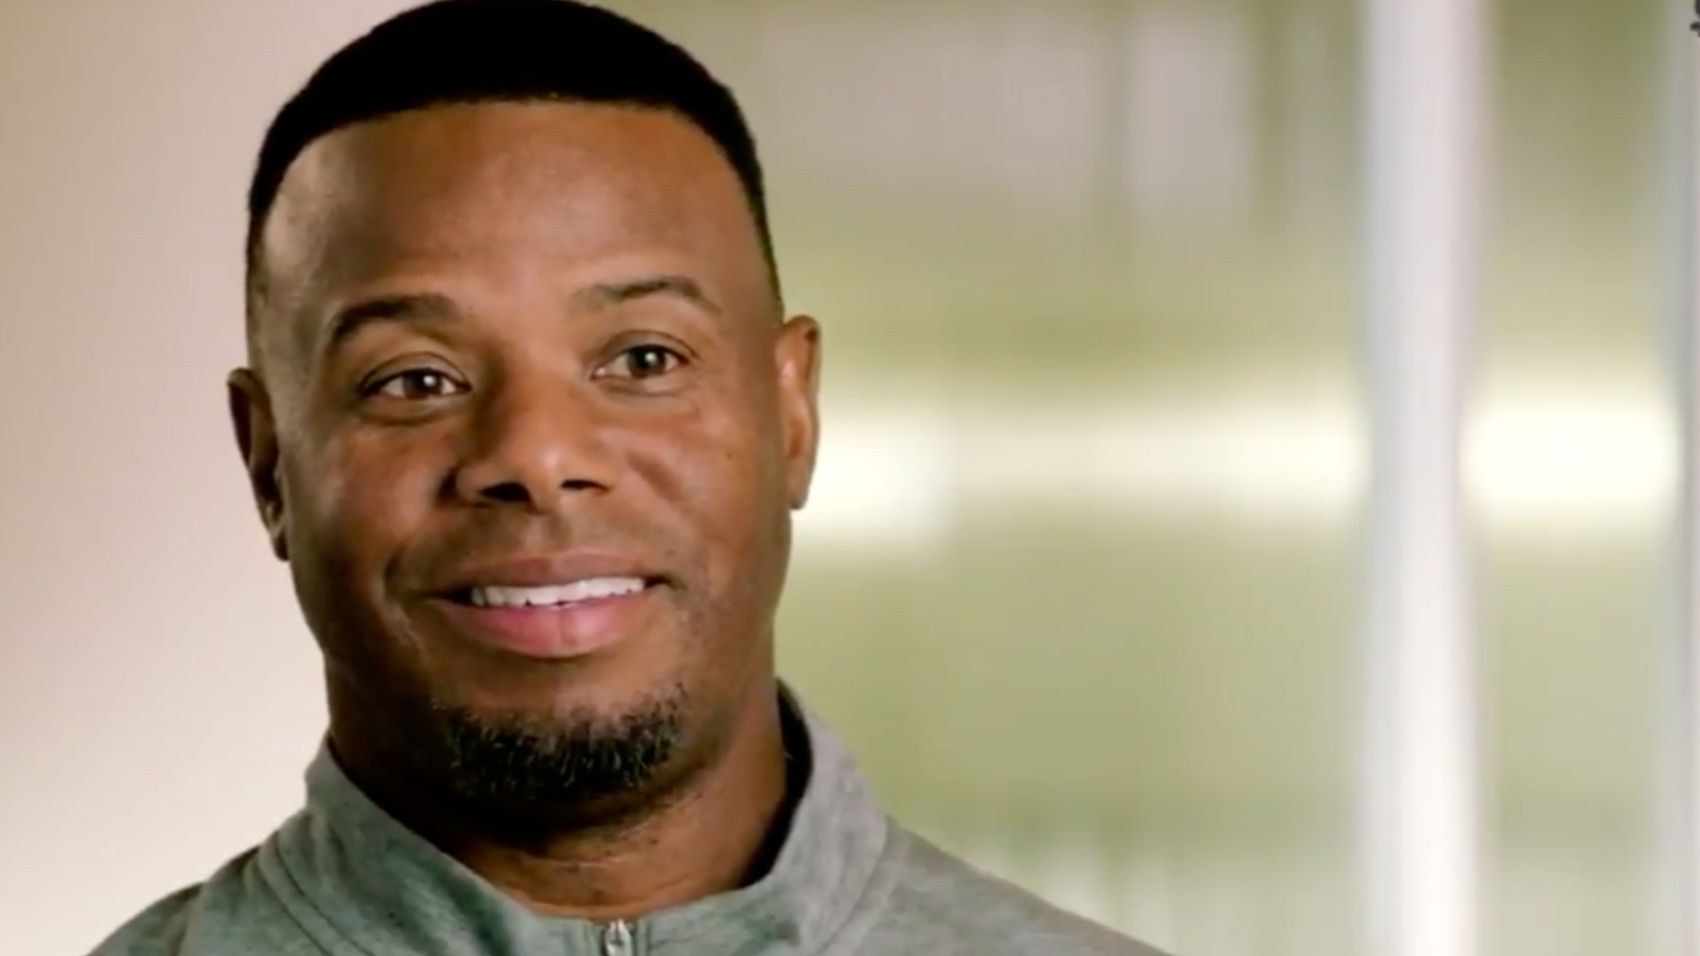 MLB rumors: Here's why Ken Griffey Jr. hated Yankees so much 